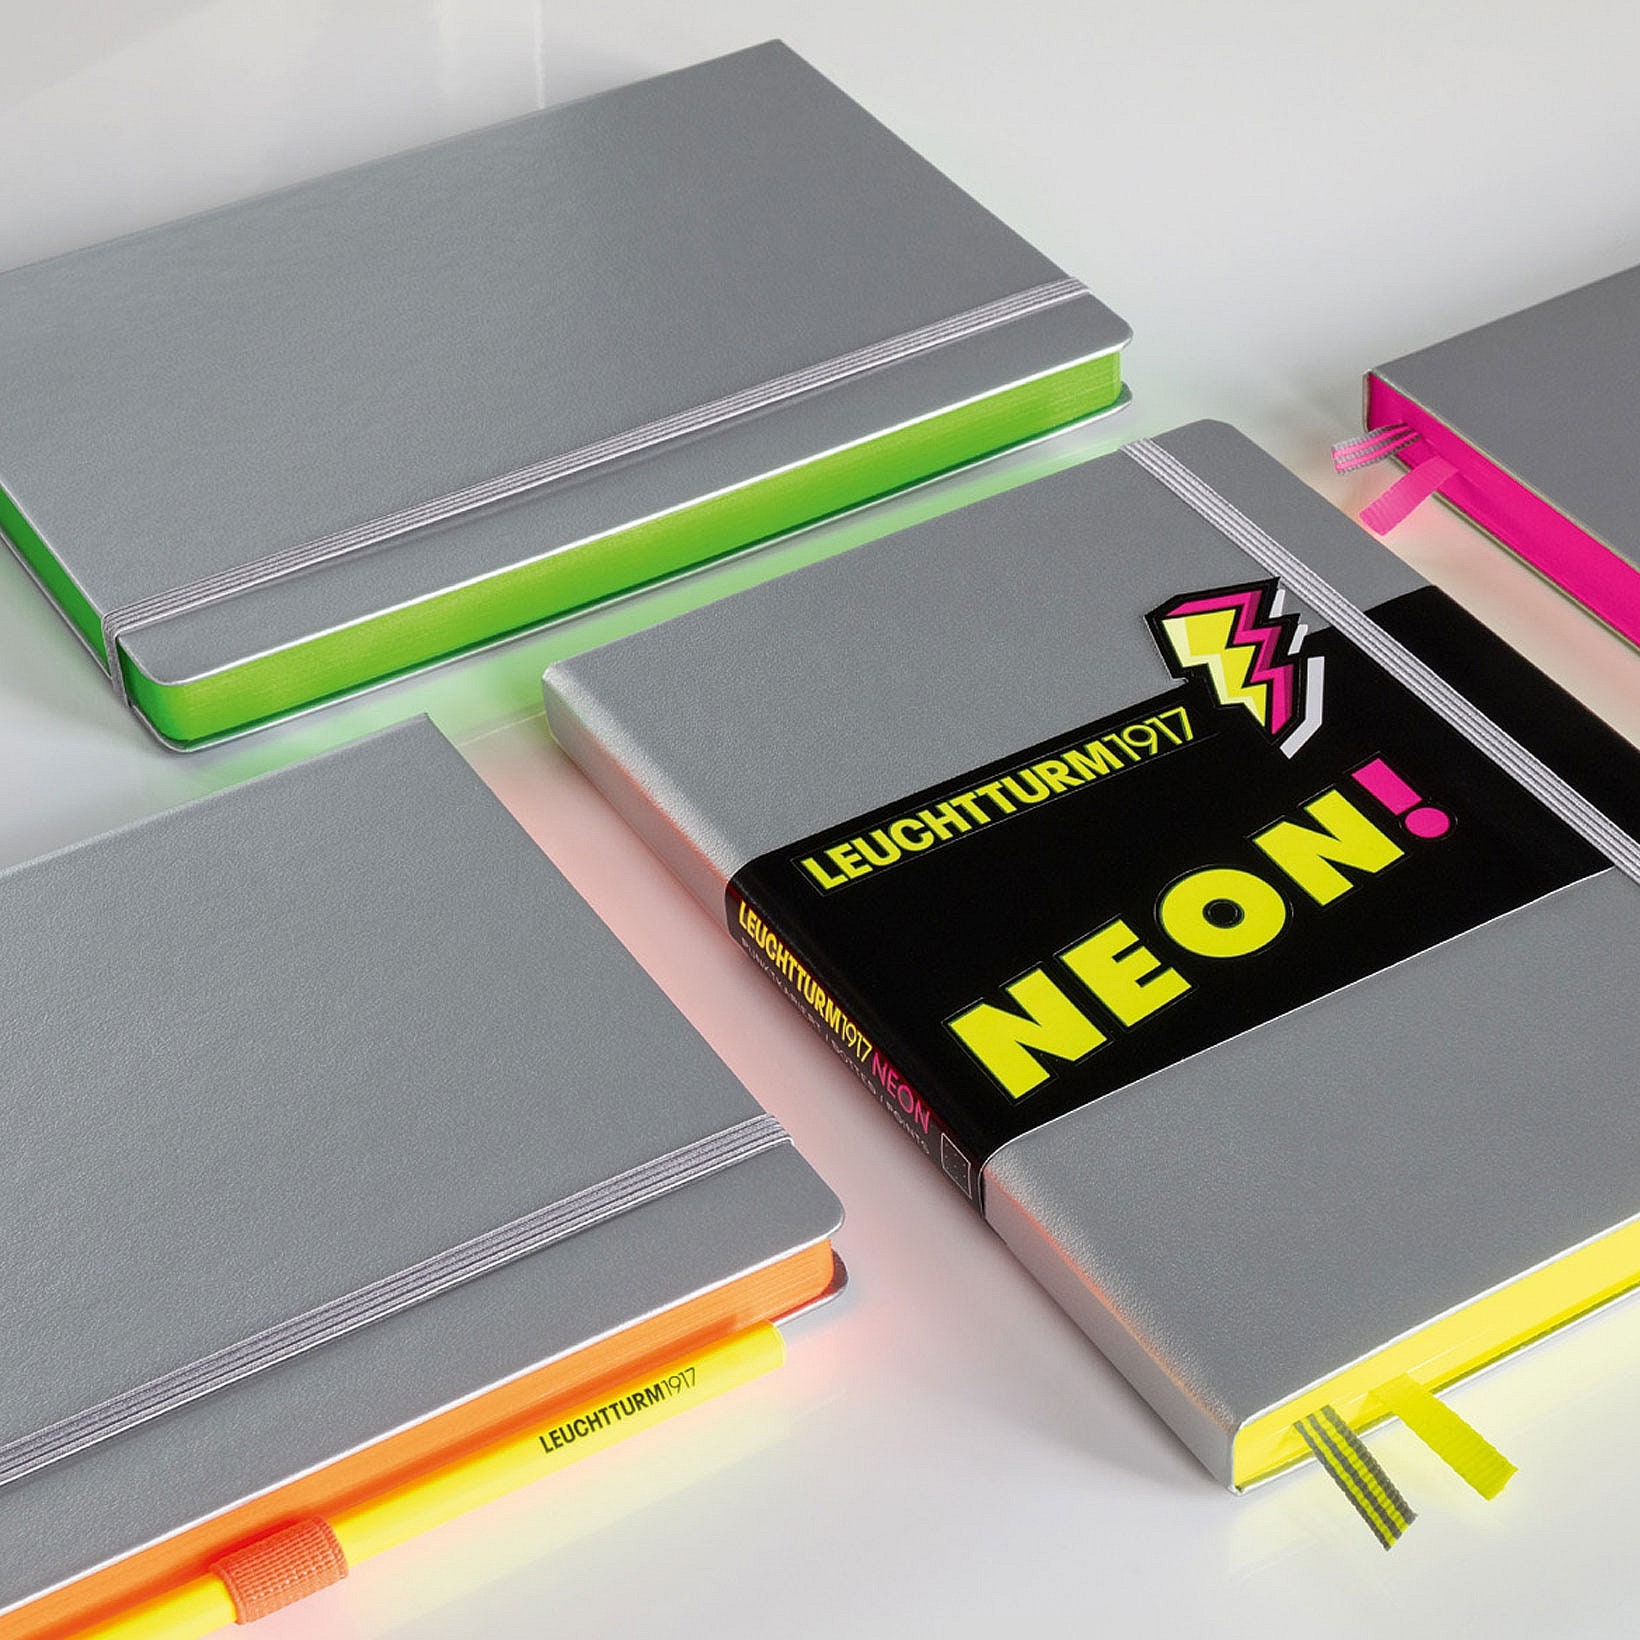 NEON Special Edition Notebook, Medium A5, Hardcover, Dotted